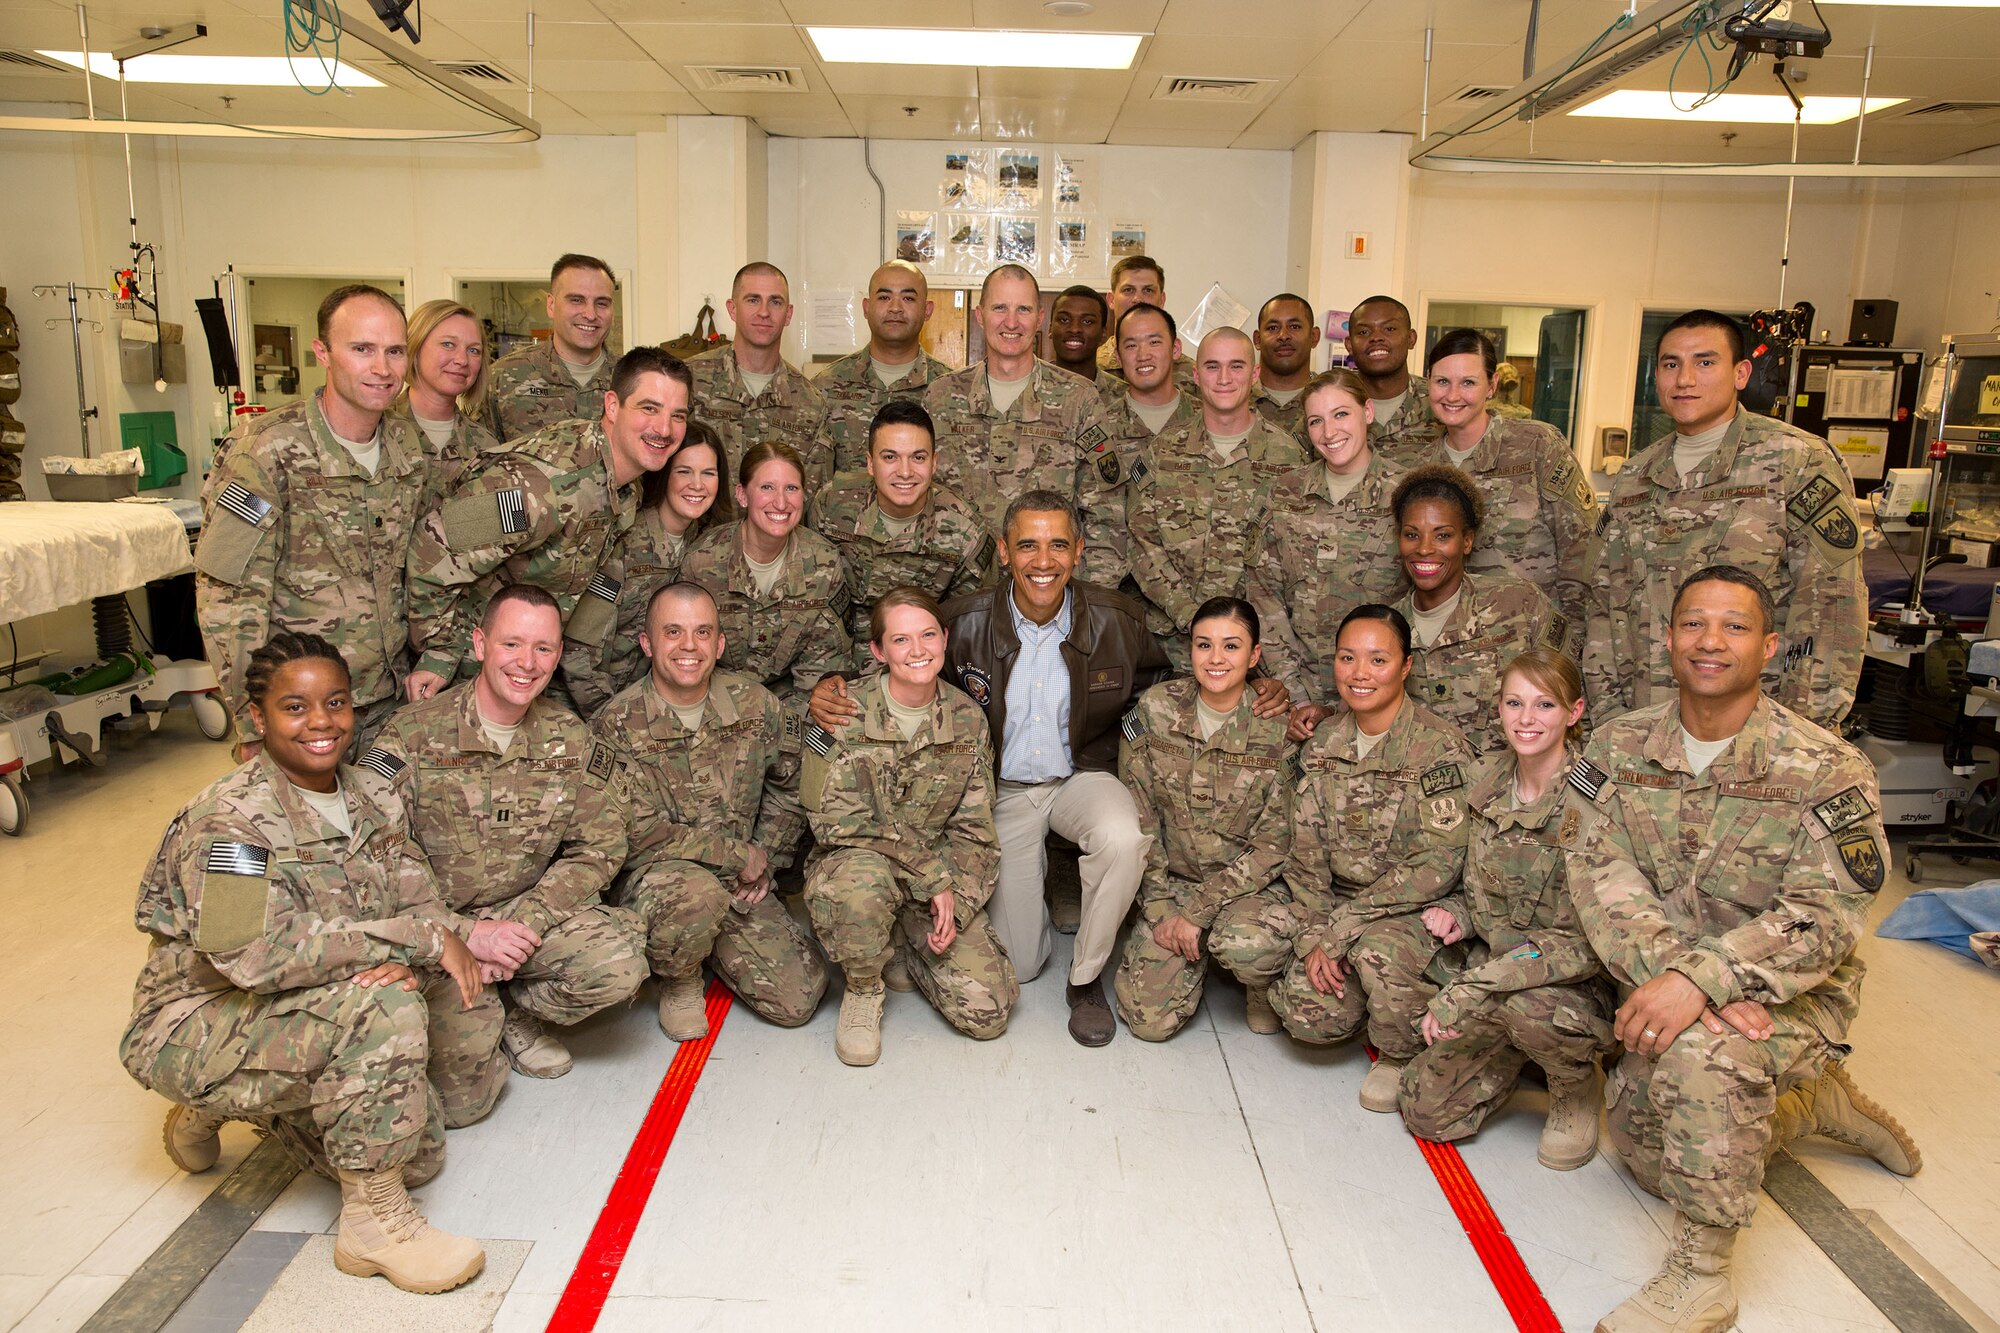 Members of the 455th Contingency Aerospace Staging Facility, pose for a
photo with President Barack Obama during his tour of the Craig Joint
Theatre Hospital, Bagram Airfield, Afghanistan. Members of the 455th CASF
care for and prep severely-injured service members for aeromedical
transport to specialized military treatment facilities outside Afghanistan.
Several members of the 455th CASF are deployed from the 59th Medical Wing
at Joint Base San Antonio-Lackland, Texas. (Courtesy photo)